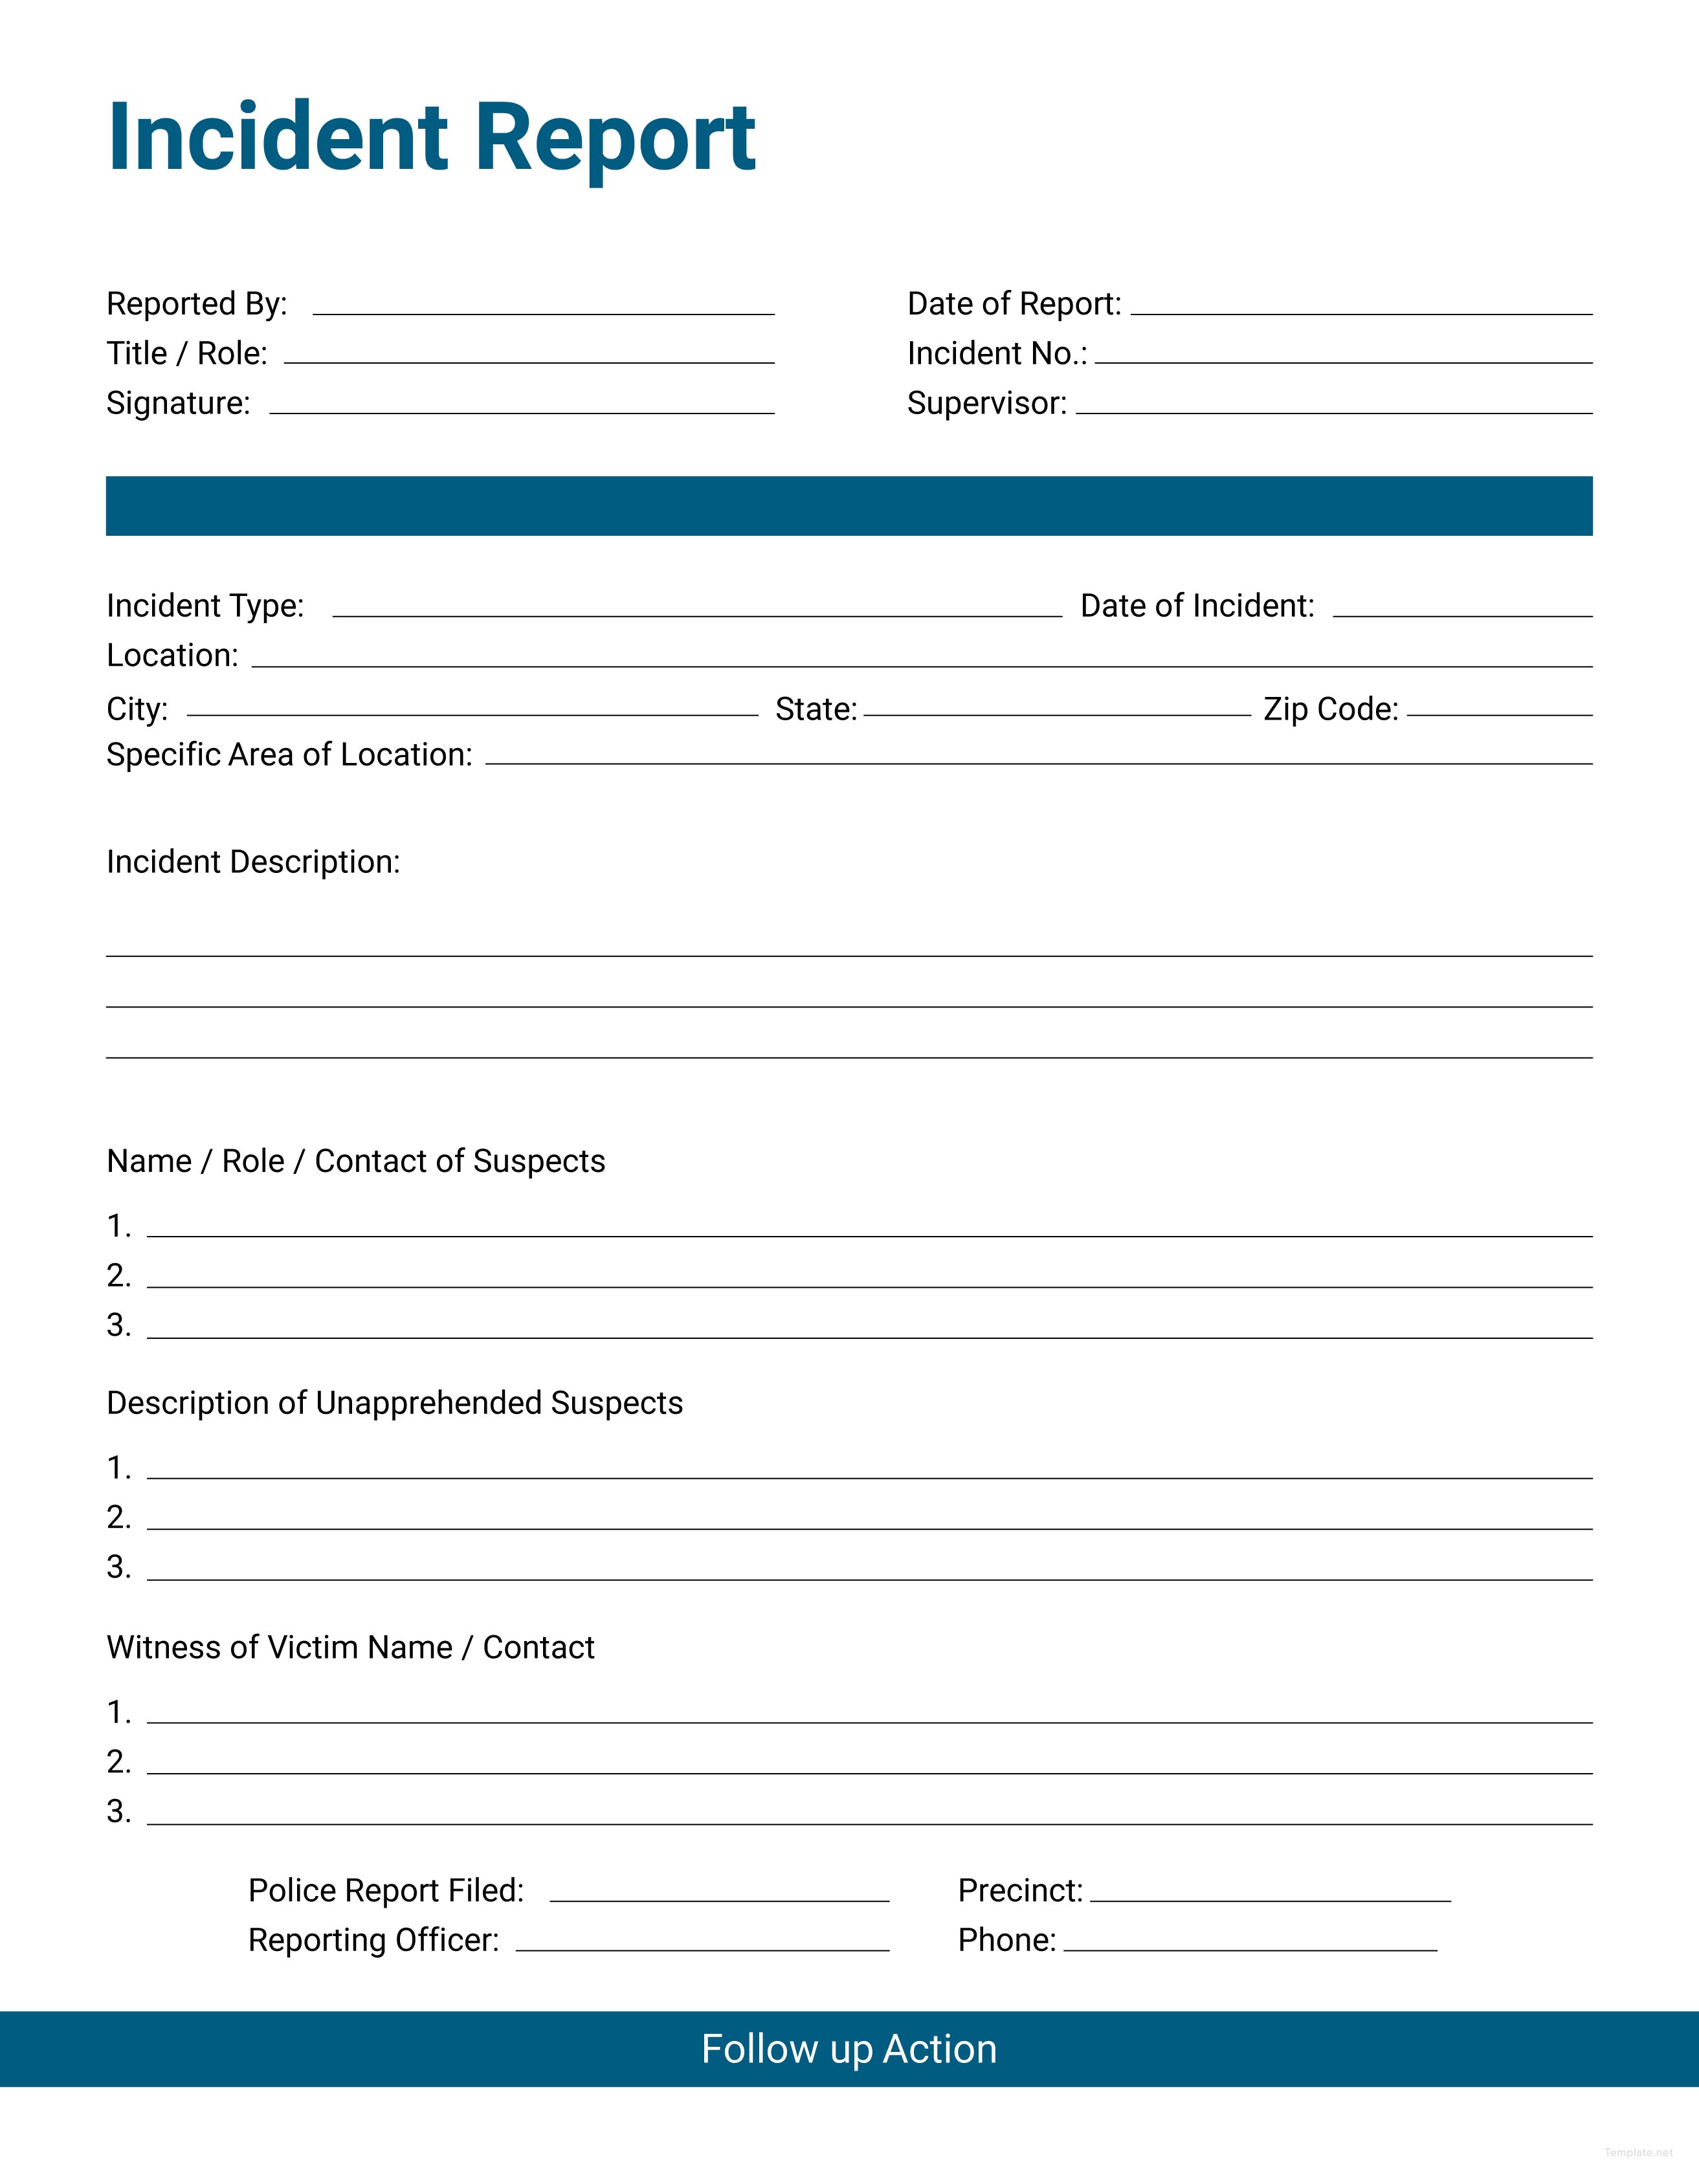 free-incident-report-template-in-adobe-illustrator-template